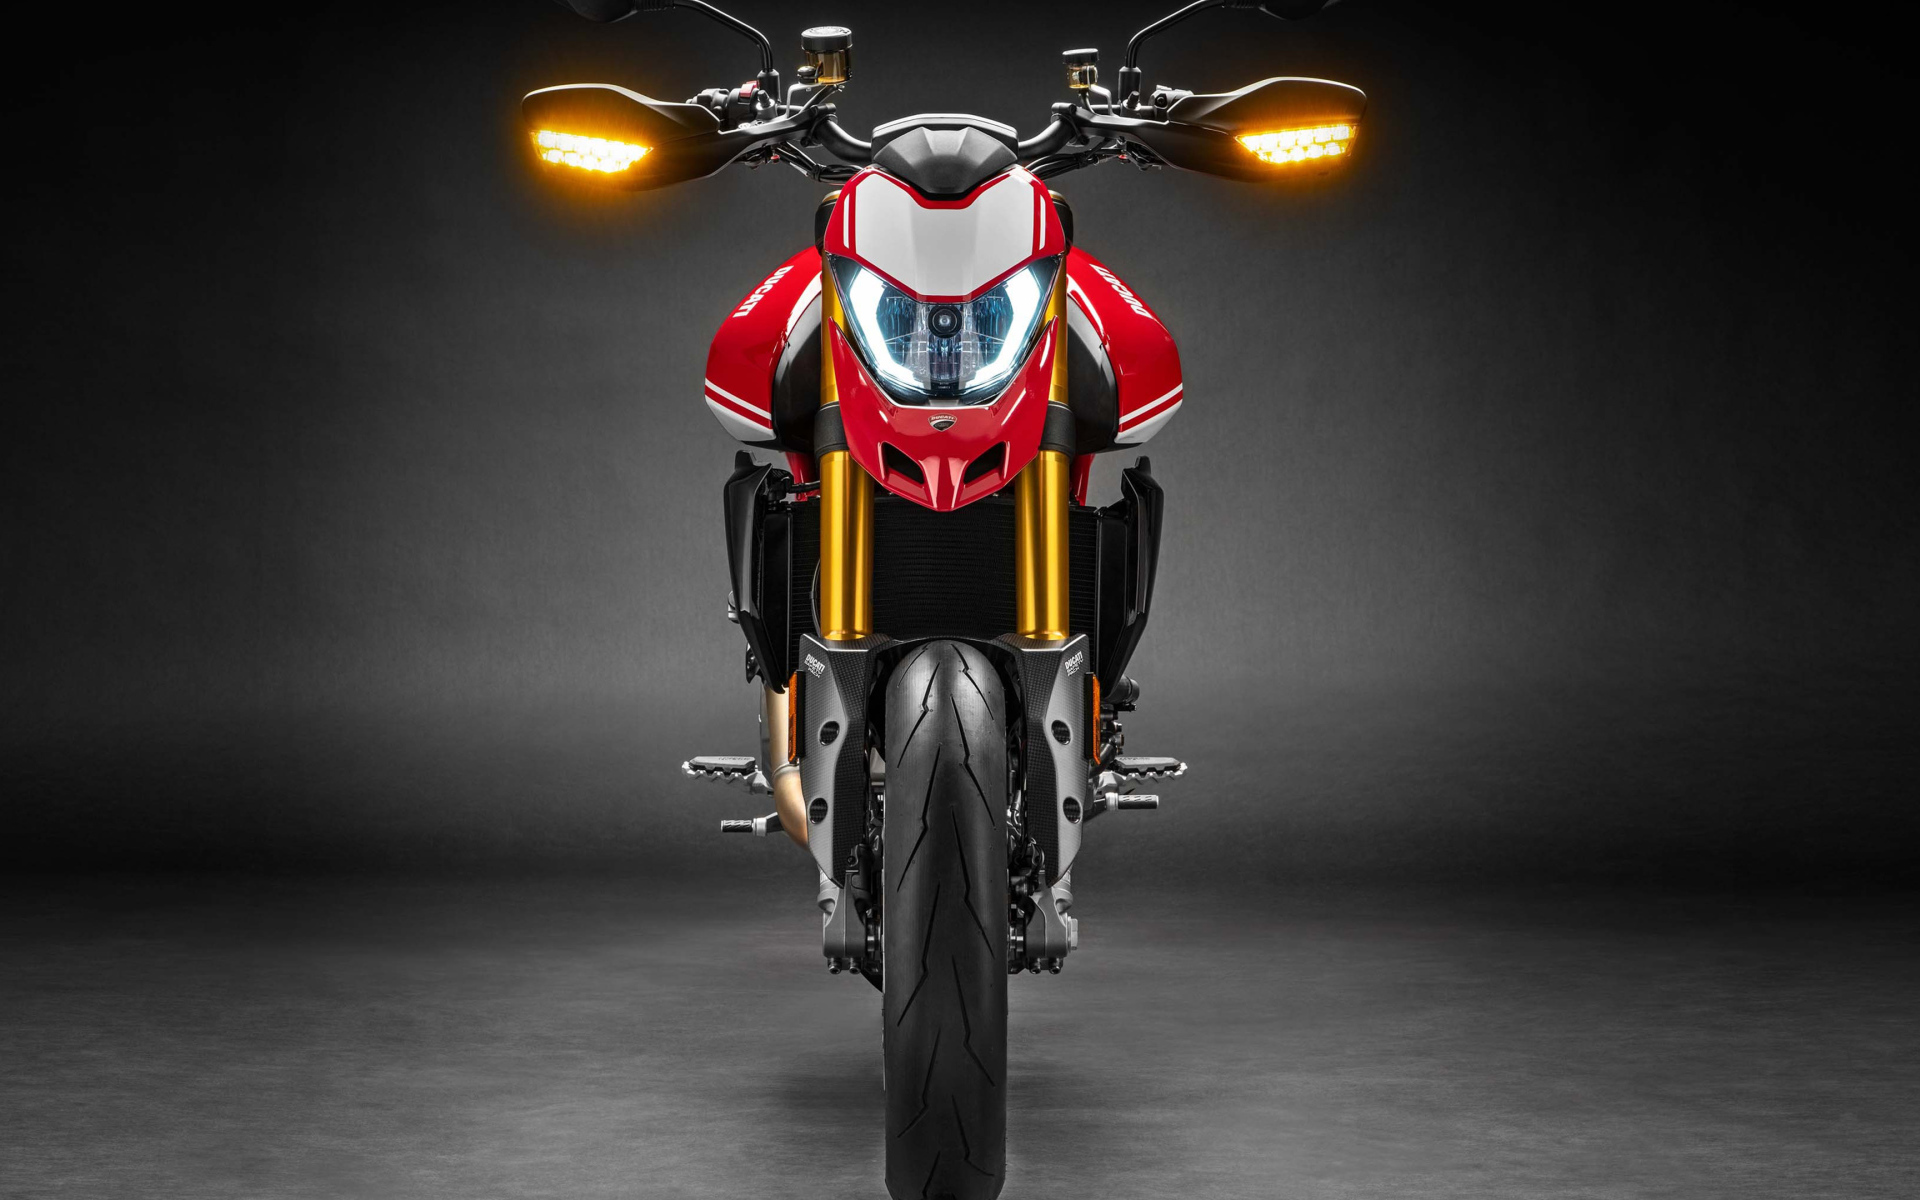 Motorcycle Ducati Hypermotard 950 SP, 2019 on a gray background front view